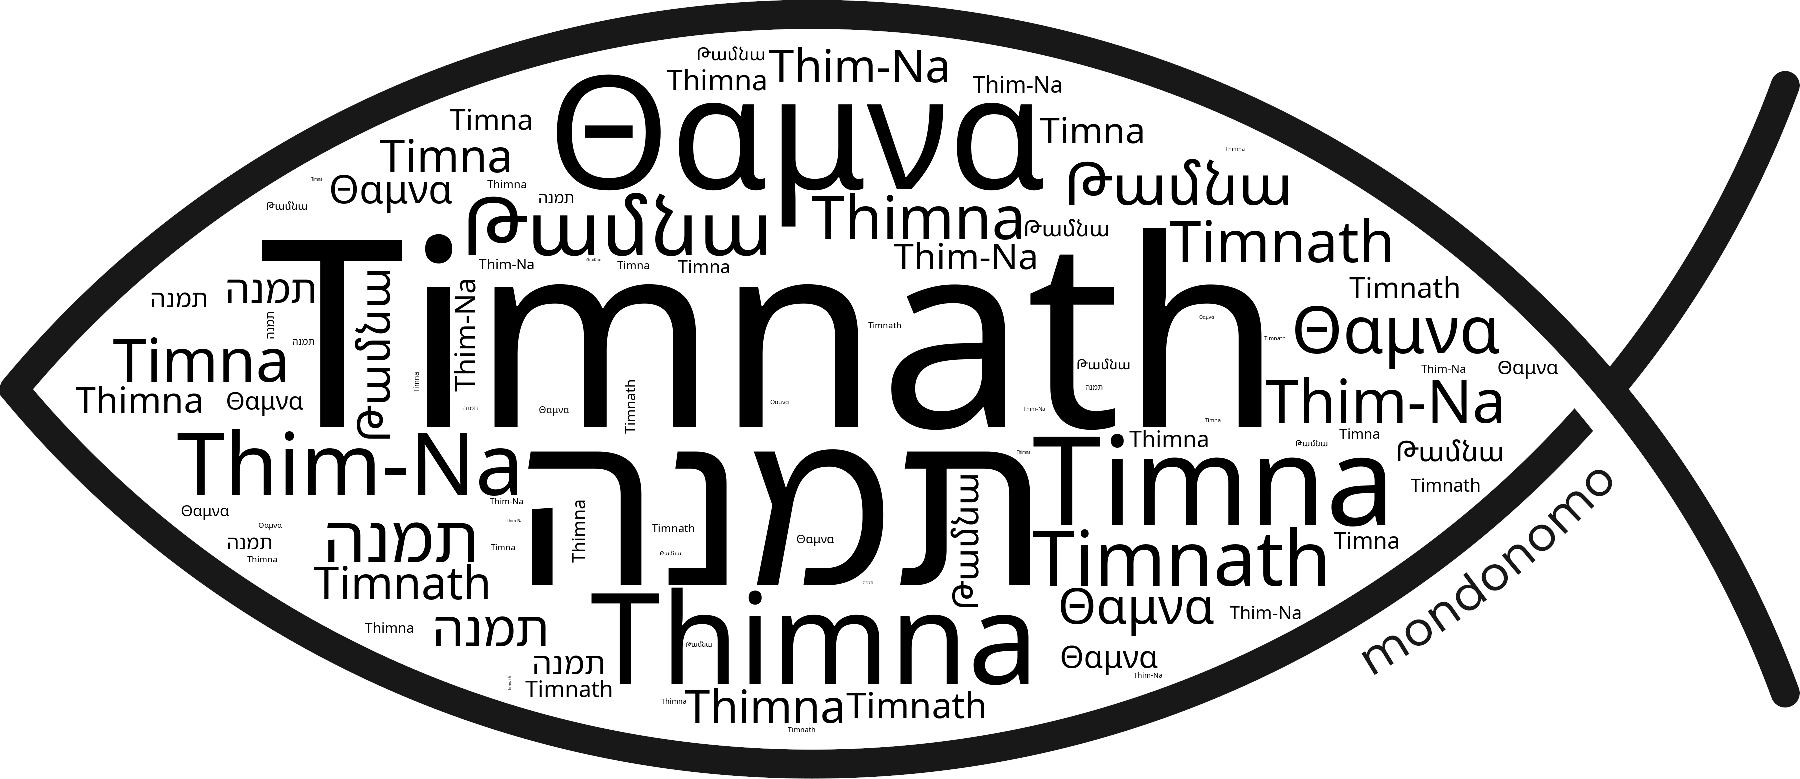 Name Timnath in the world's Bibles